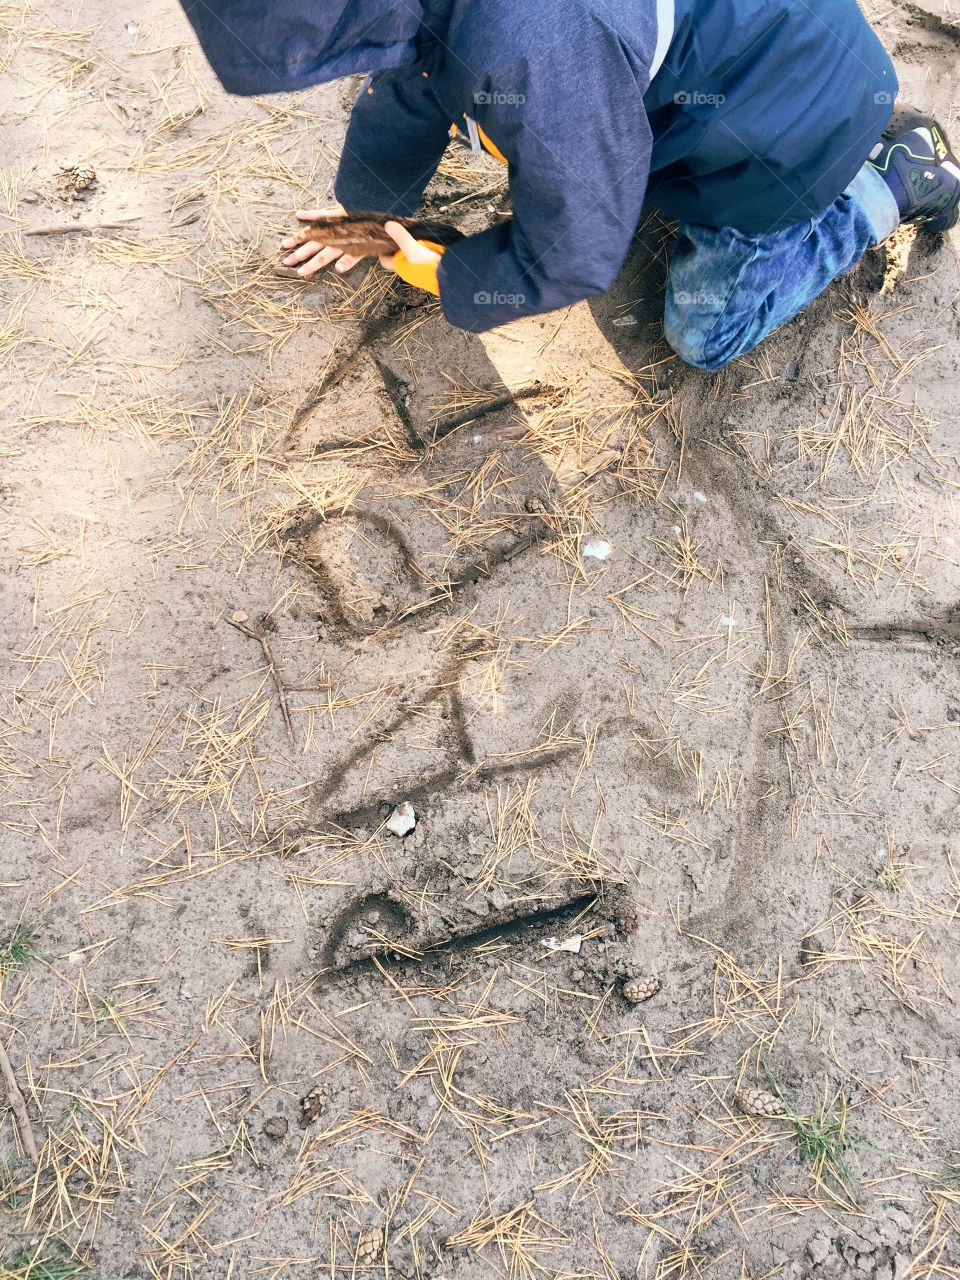 Boy writing with stick in sand. Young boy writing Papa with a stick into the sand